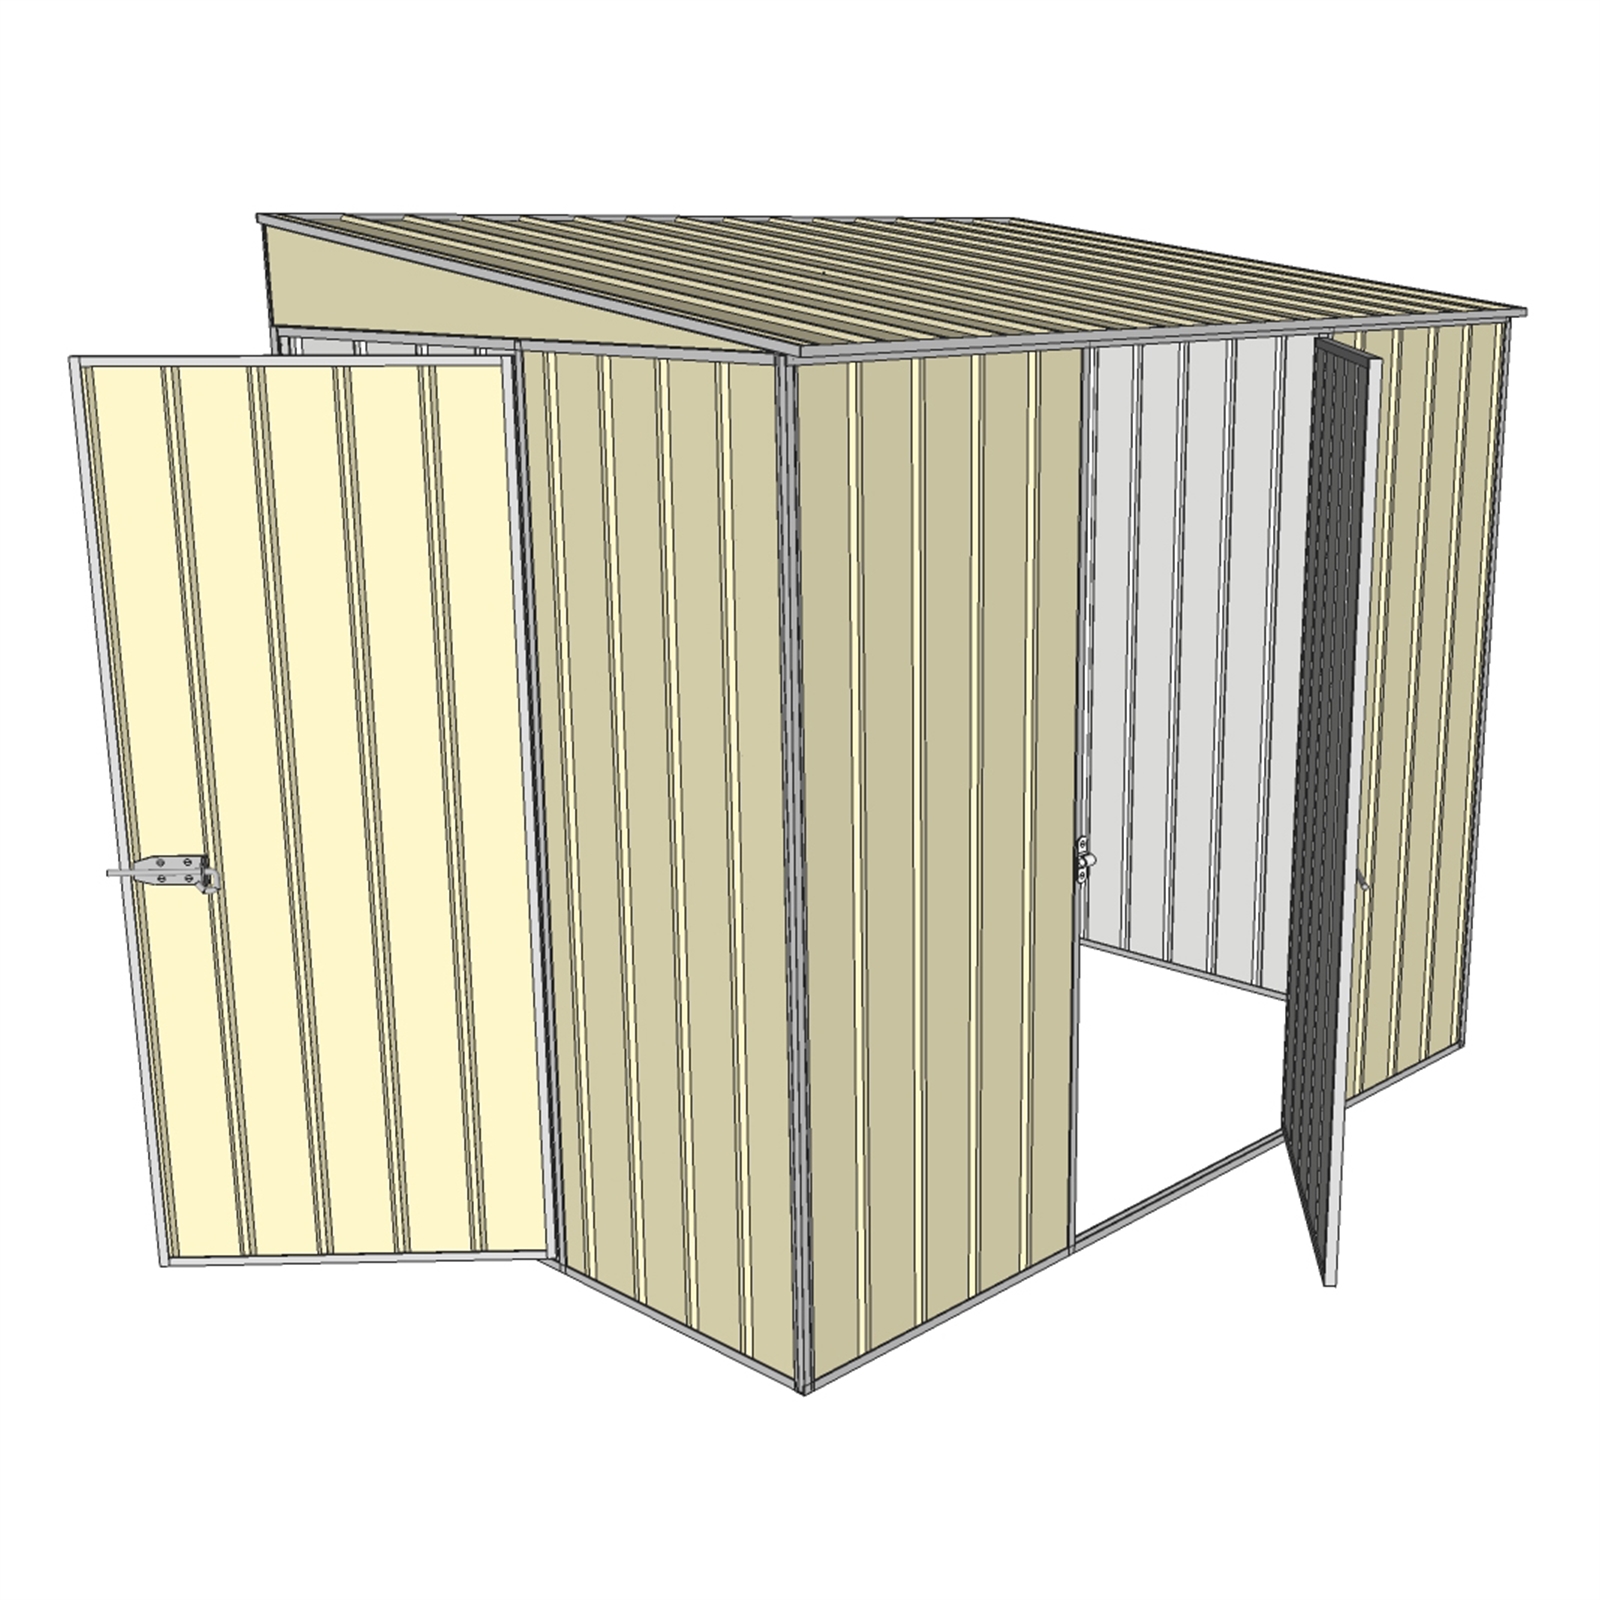 Build-a-Shed 2.3 x 2.0 x 1.5m Cream Skillion Two Single Hinged Doors Narrow Shed